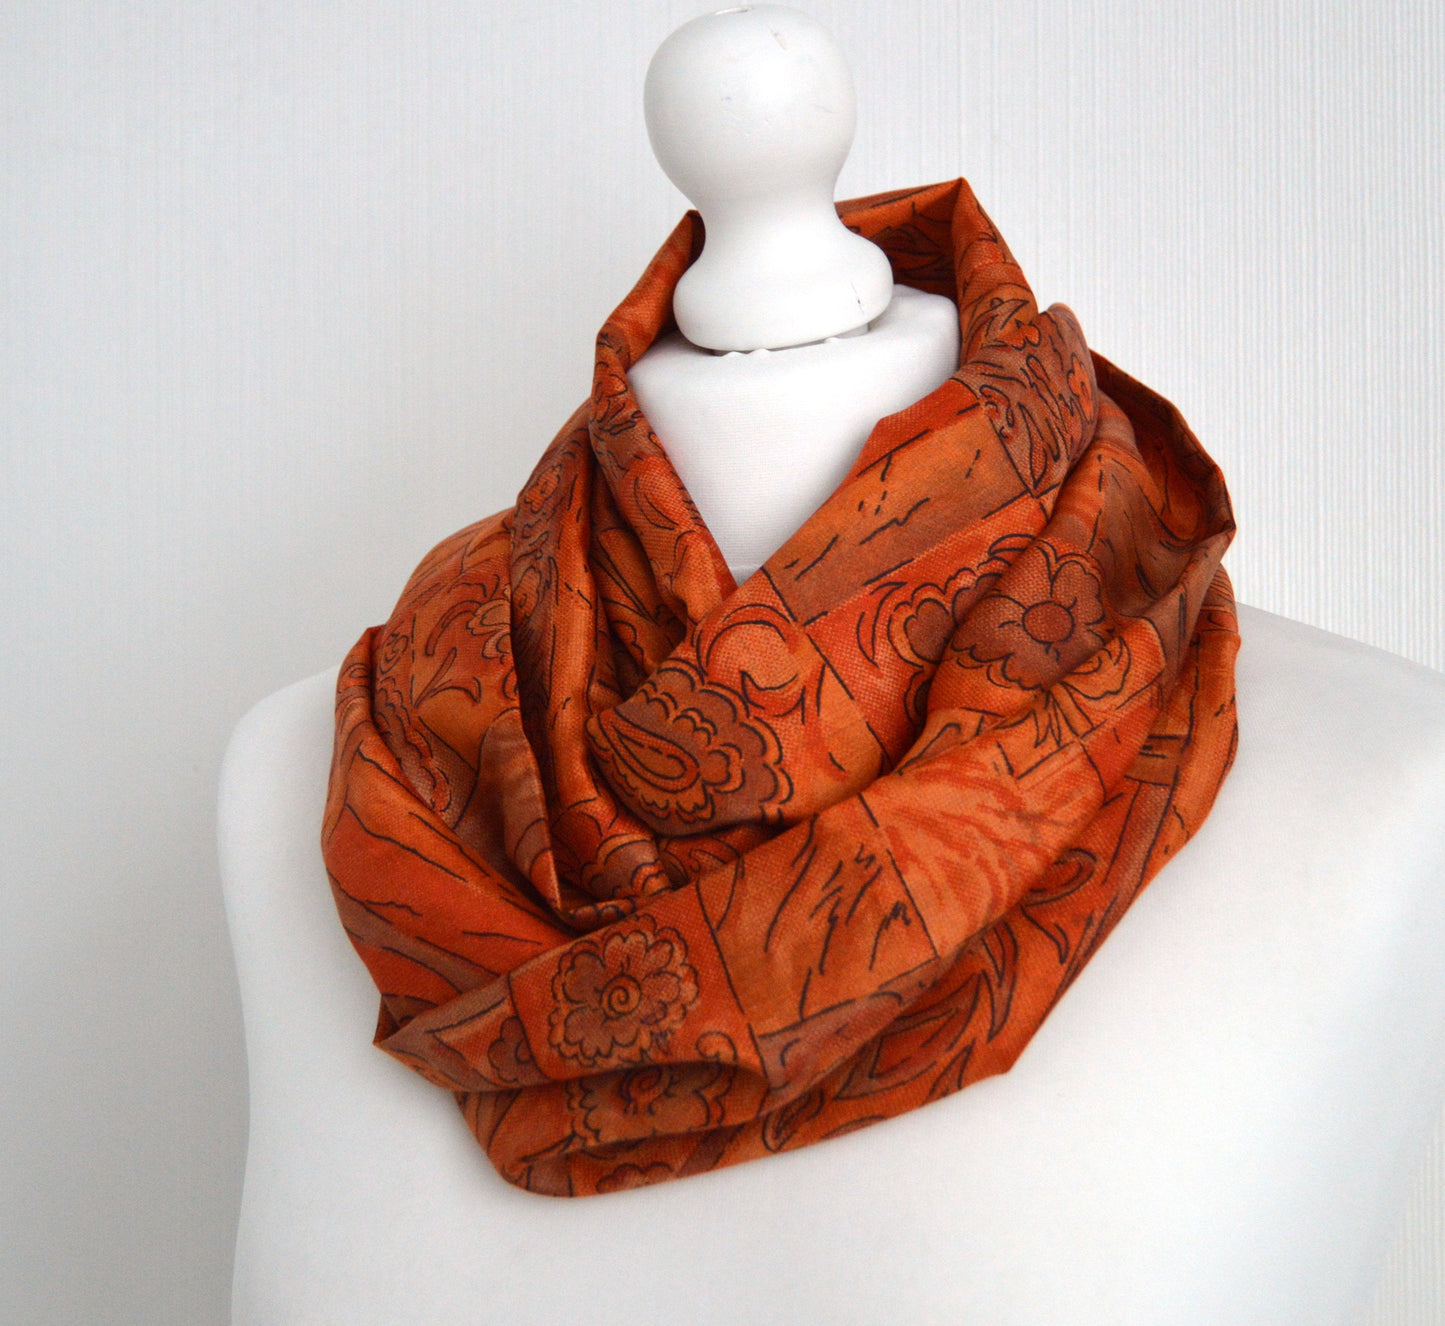 Burnt Orange Sari Silk Scarf - Handmade Boho Eco Friendly Upcycled Womens Scarf - Sophisticated Spring Summer Trend Mothers Day Gift for Her